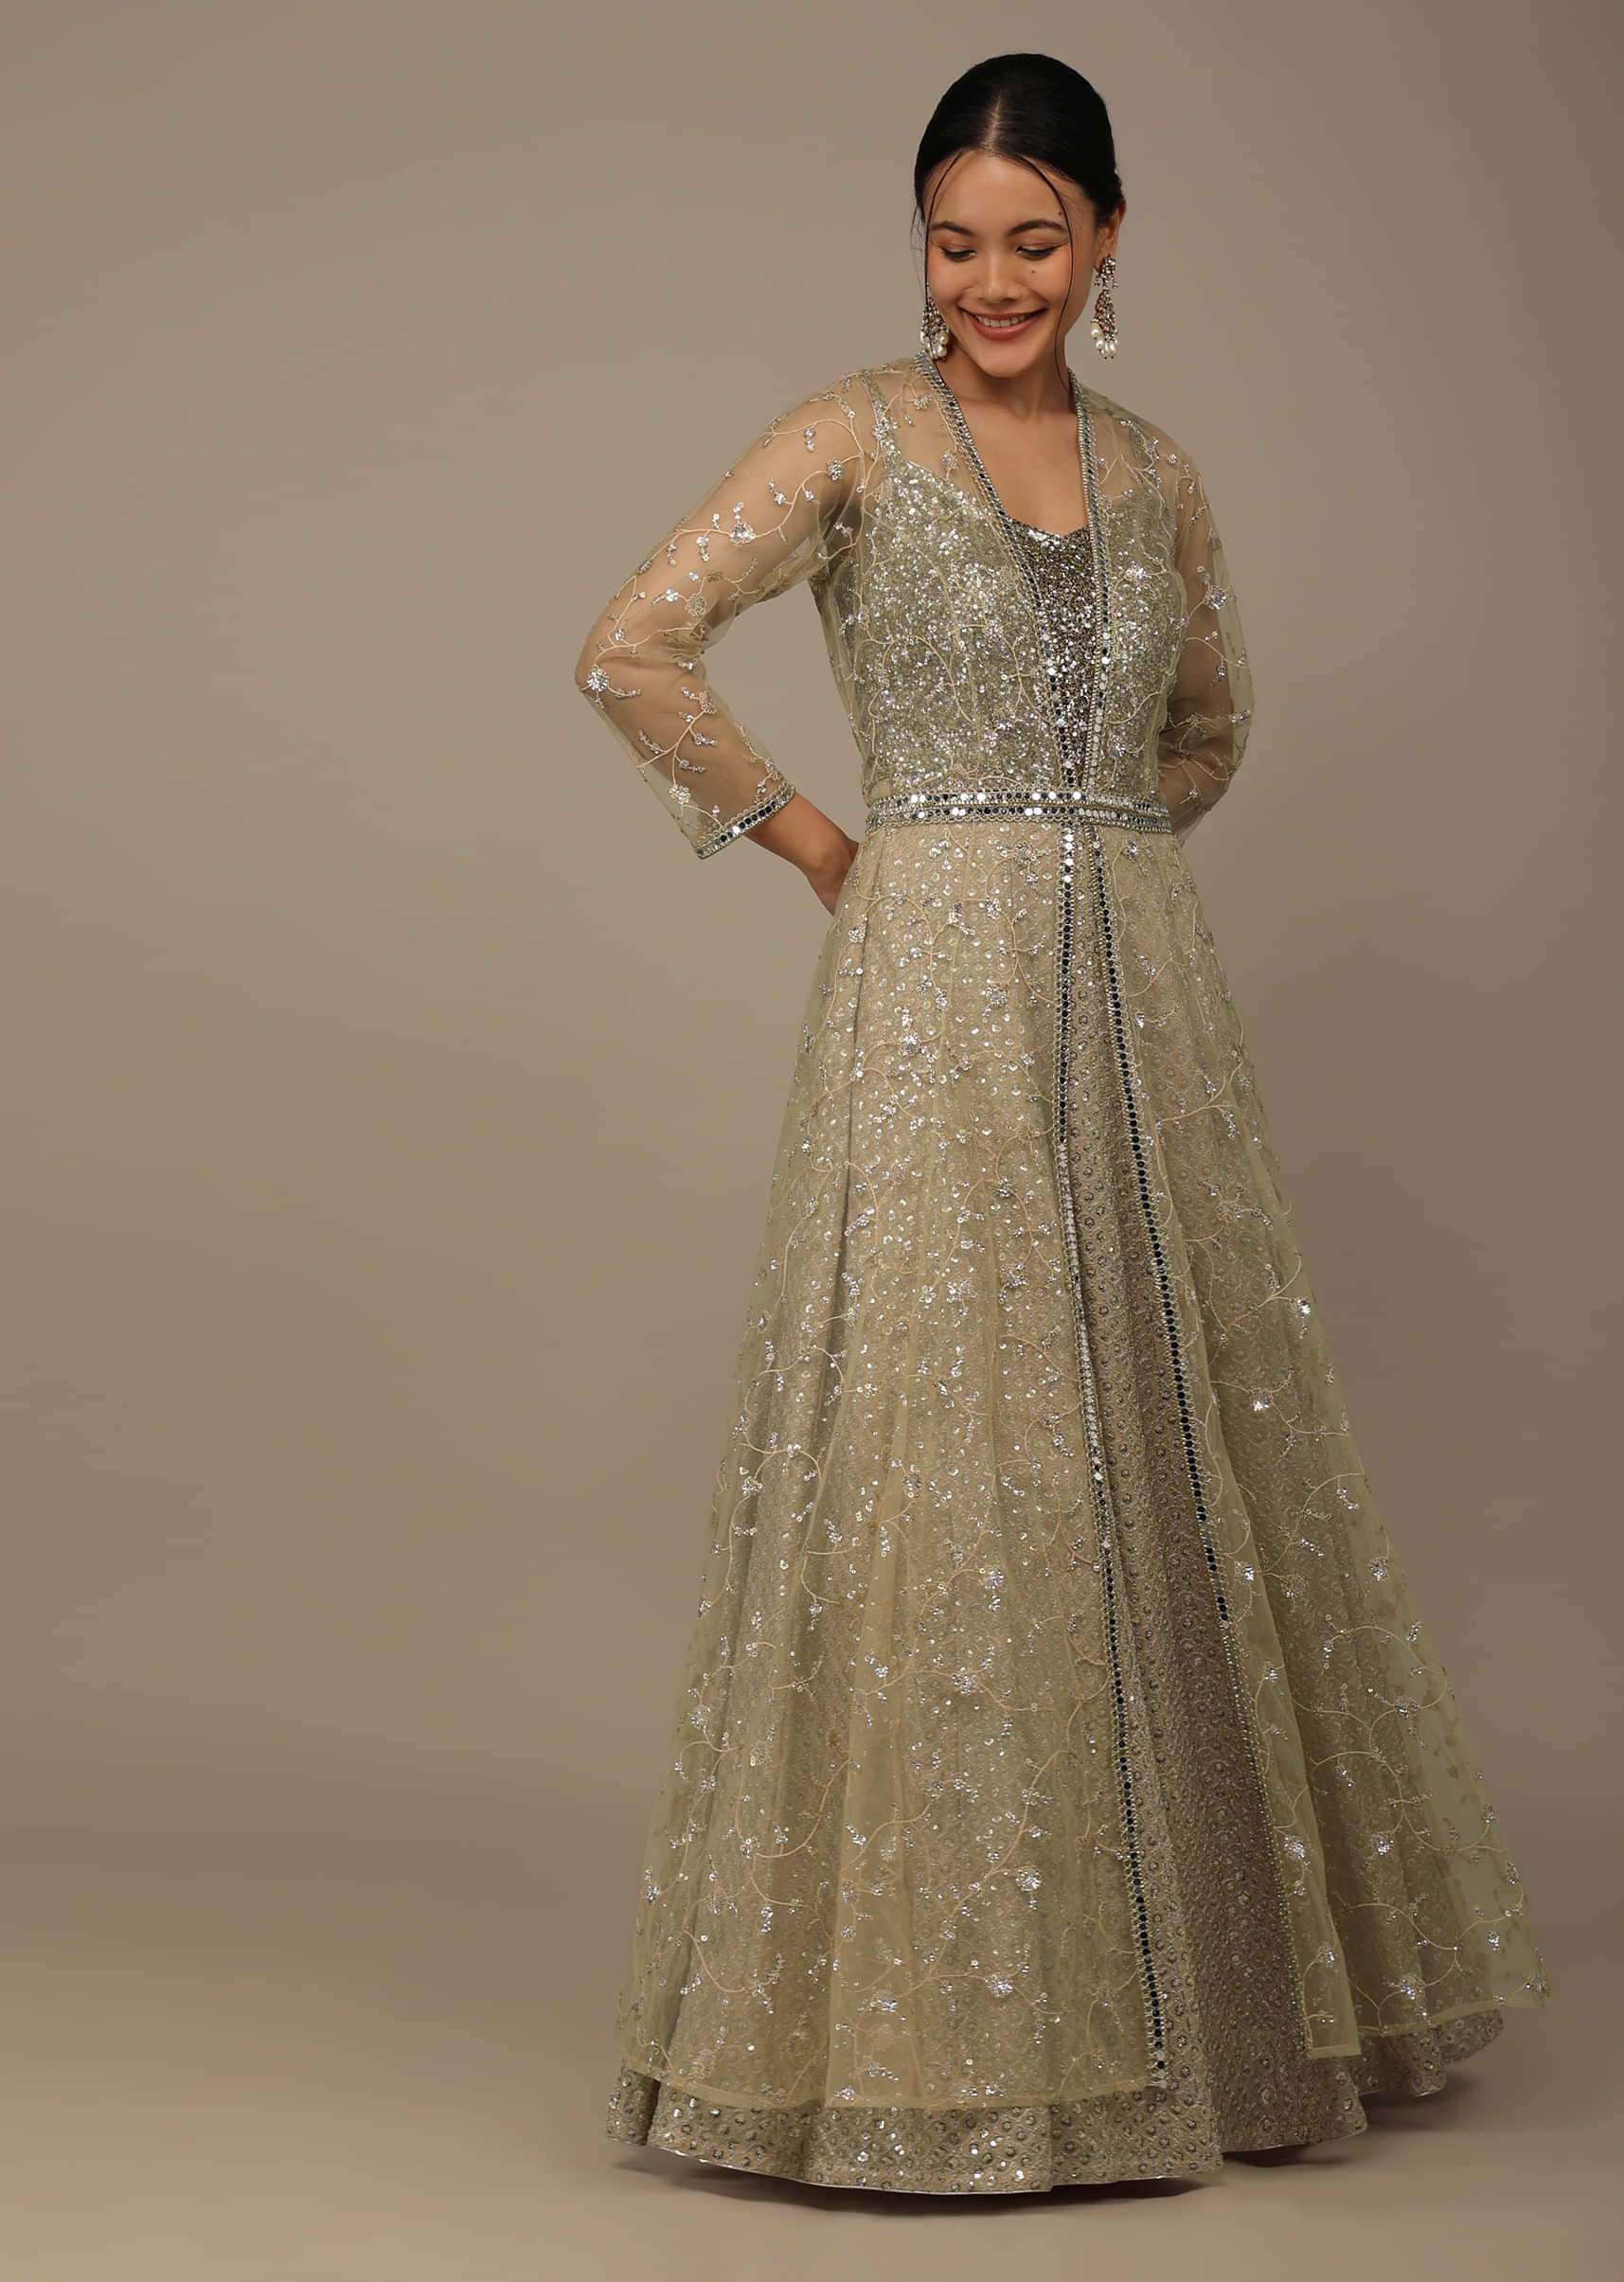 Beige Festive Embroidered Suit Set In Georgette With Net Jacket And Waistbelt